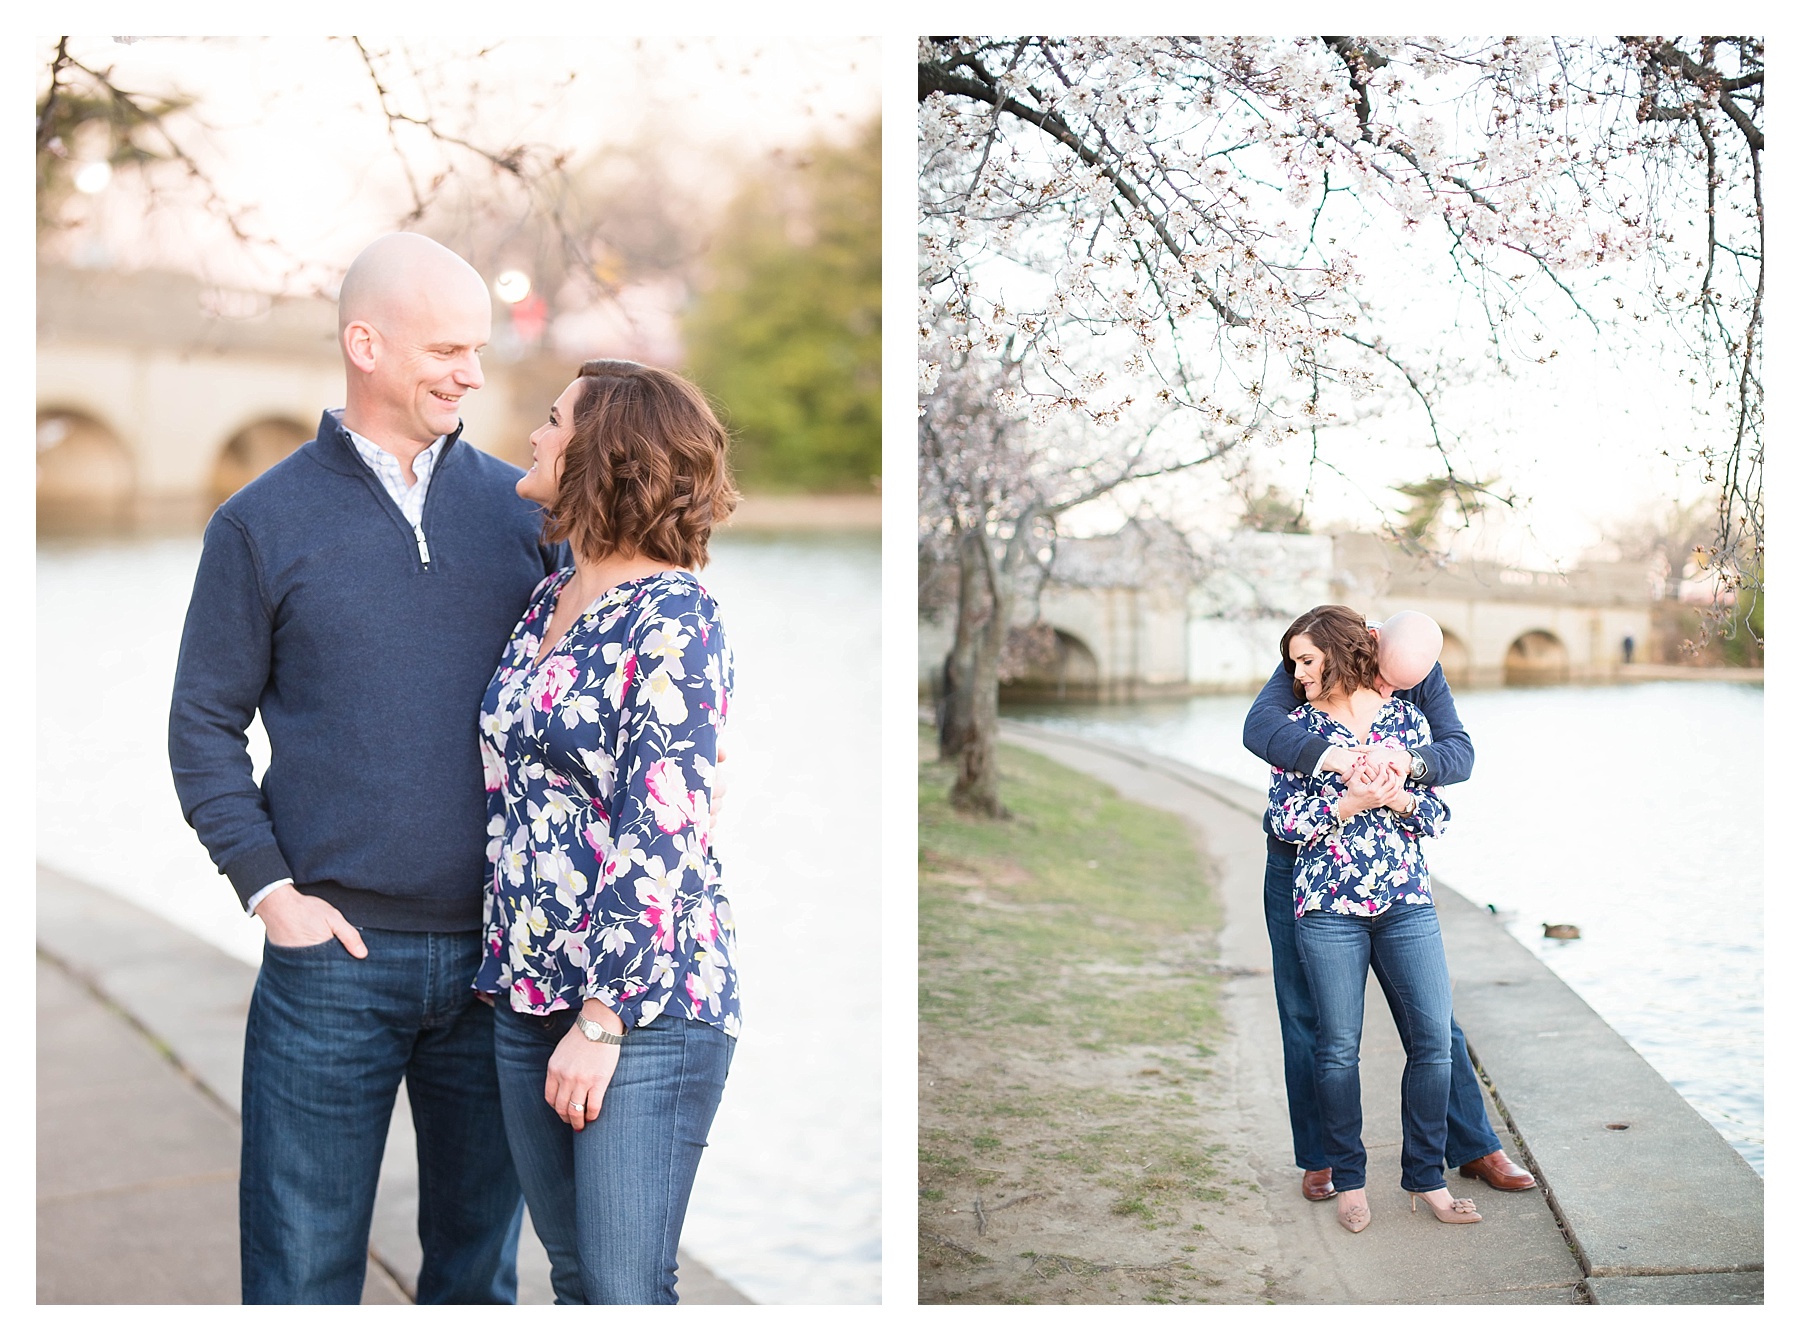 Candice Adelle Photography DC Destination Wedding Photographer Cherry Blossom Engagment Session_0005.jpg